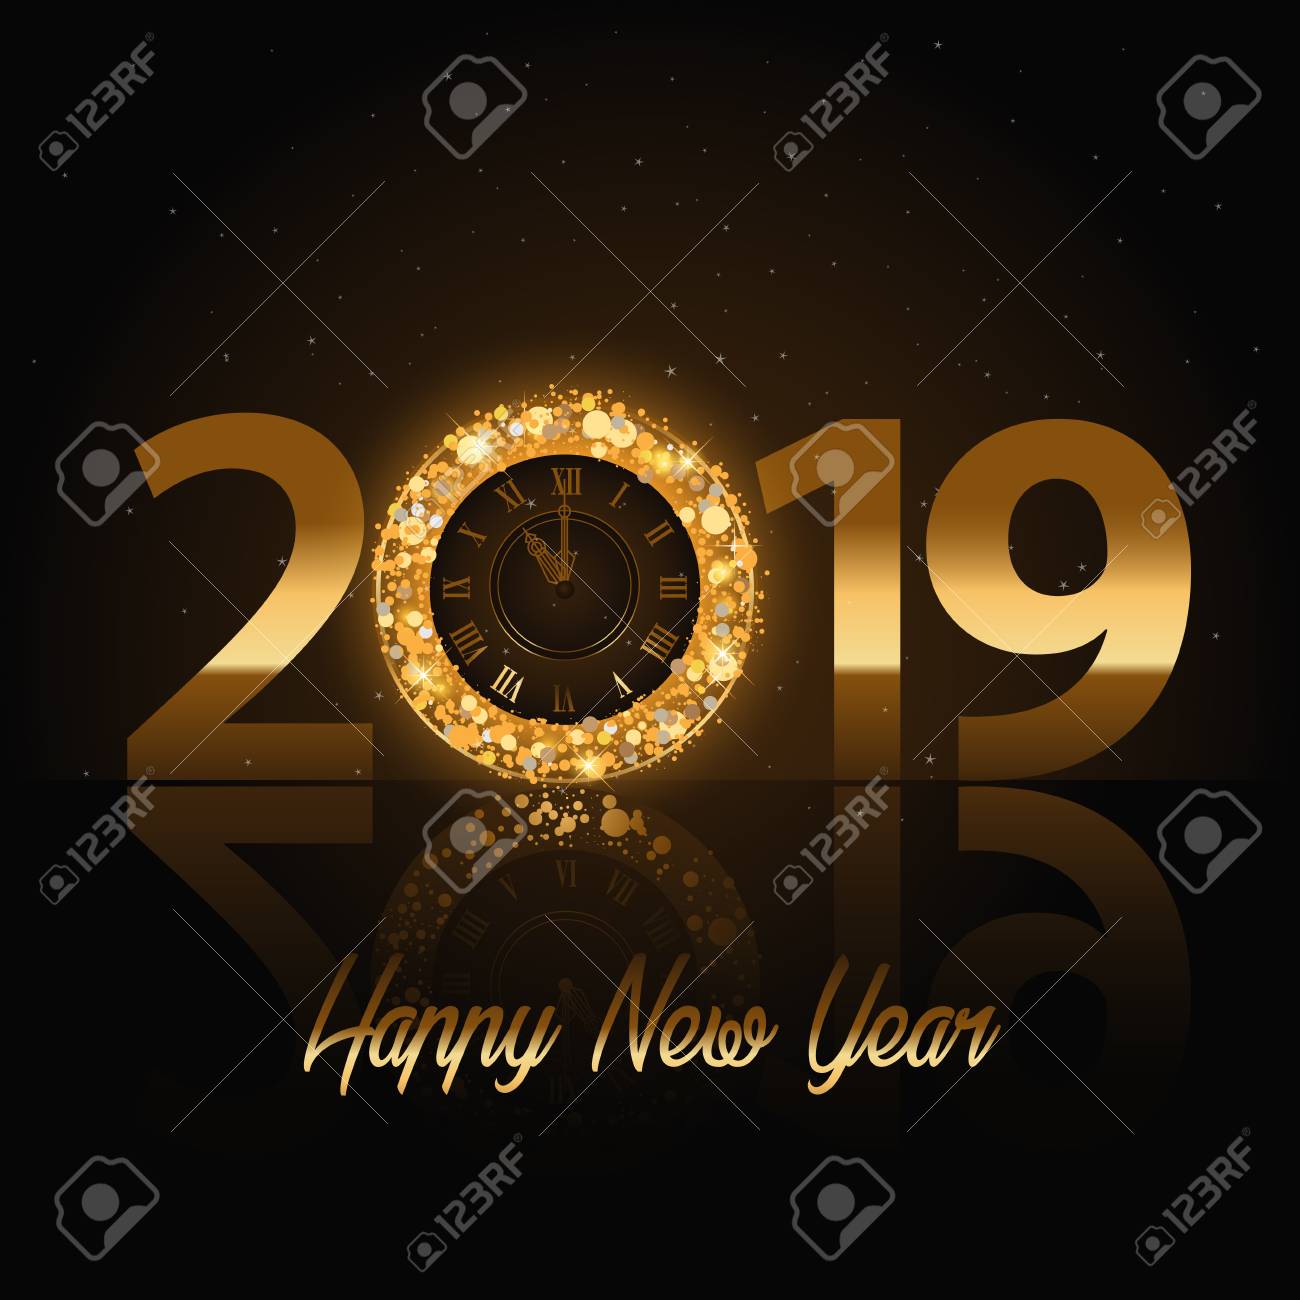 Vector Happy New Year Background With Golden Clock Royalty